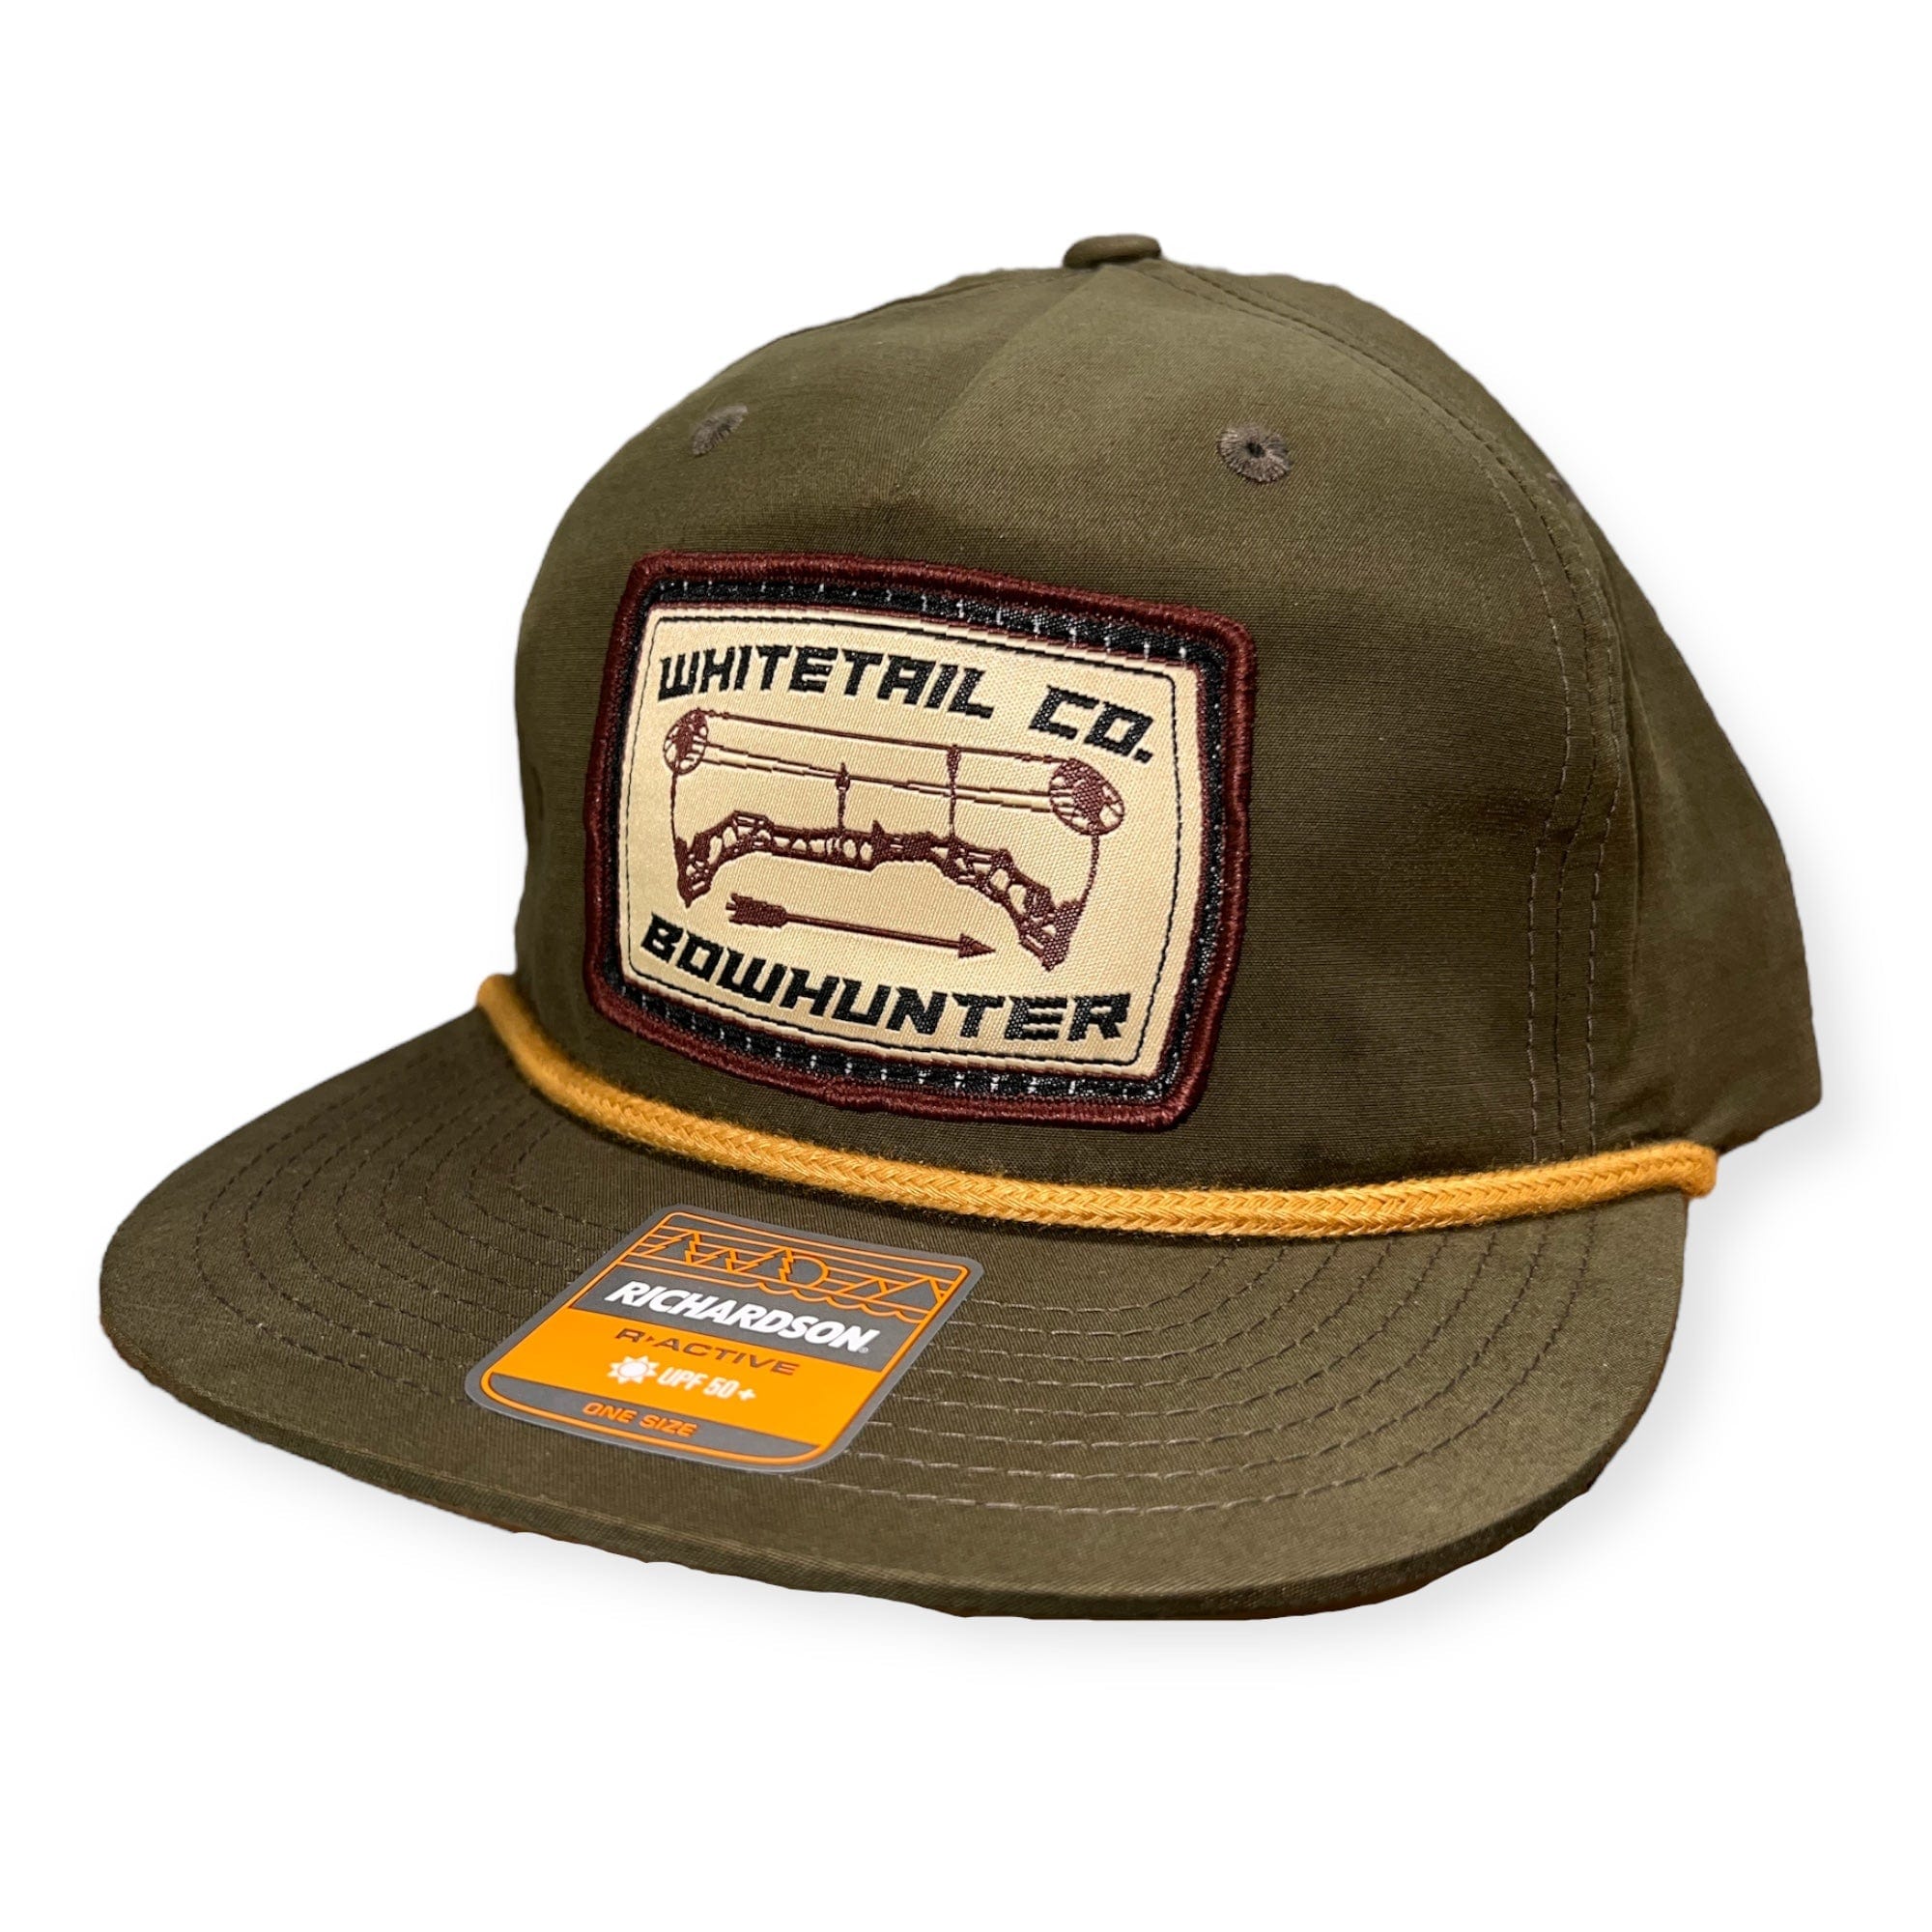 Whitetail Company Hats Whitetail Co. Bowhunter Richardson Ropy Hat Loden